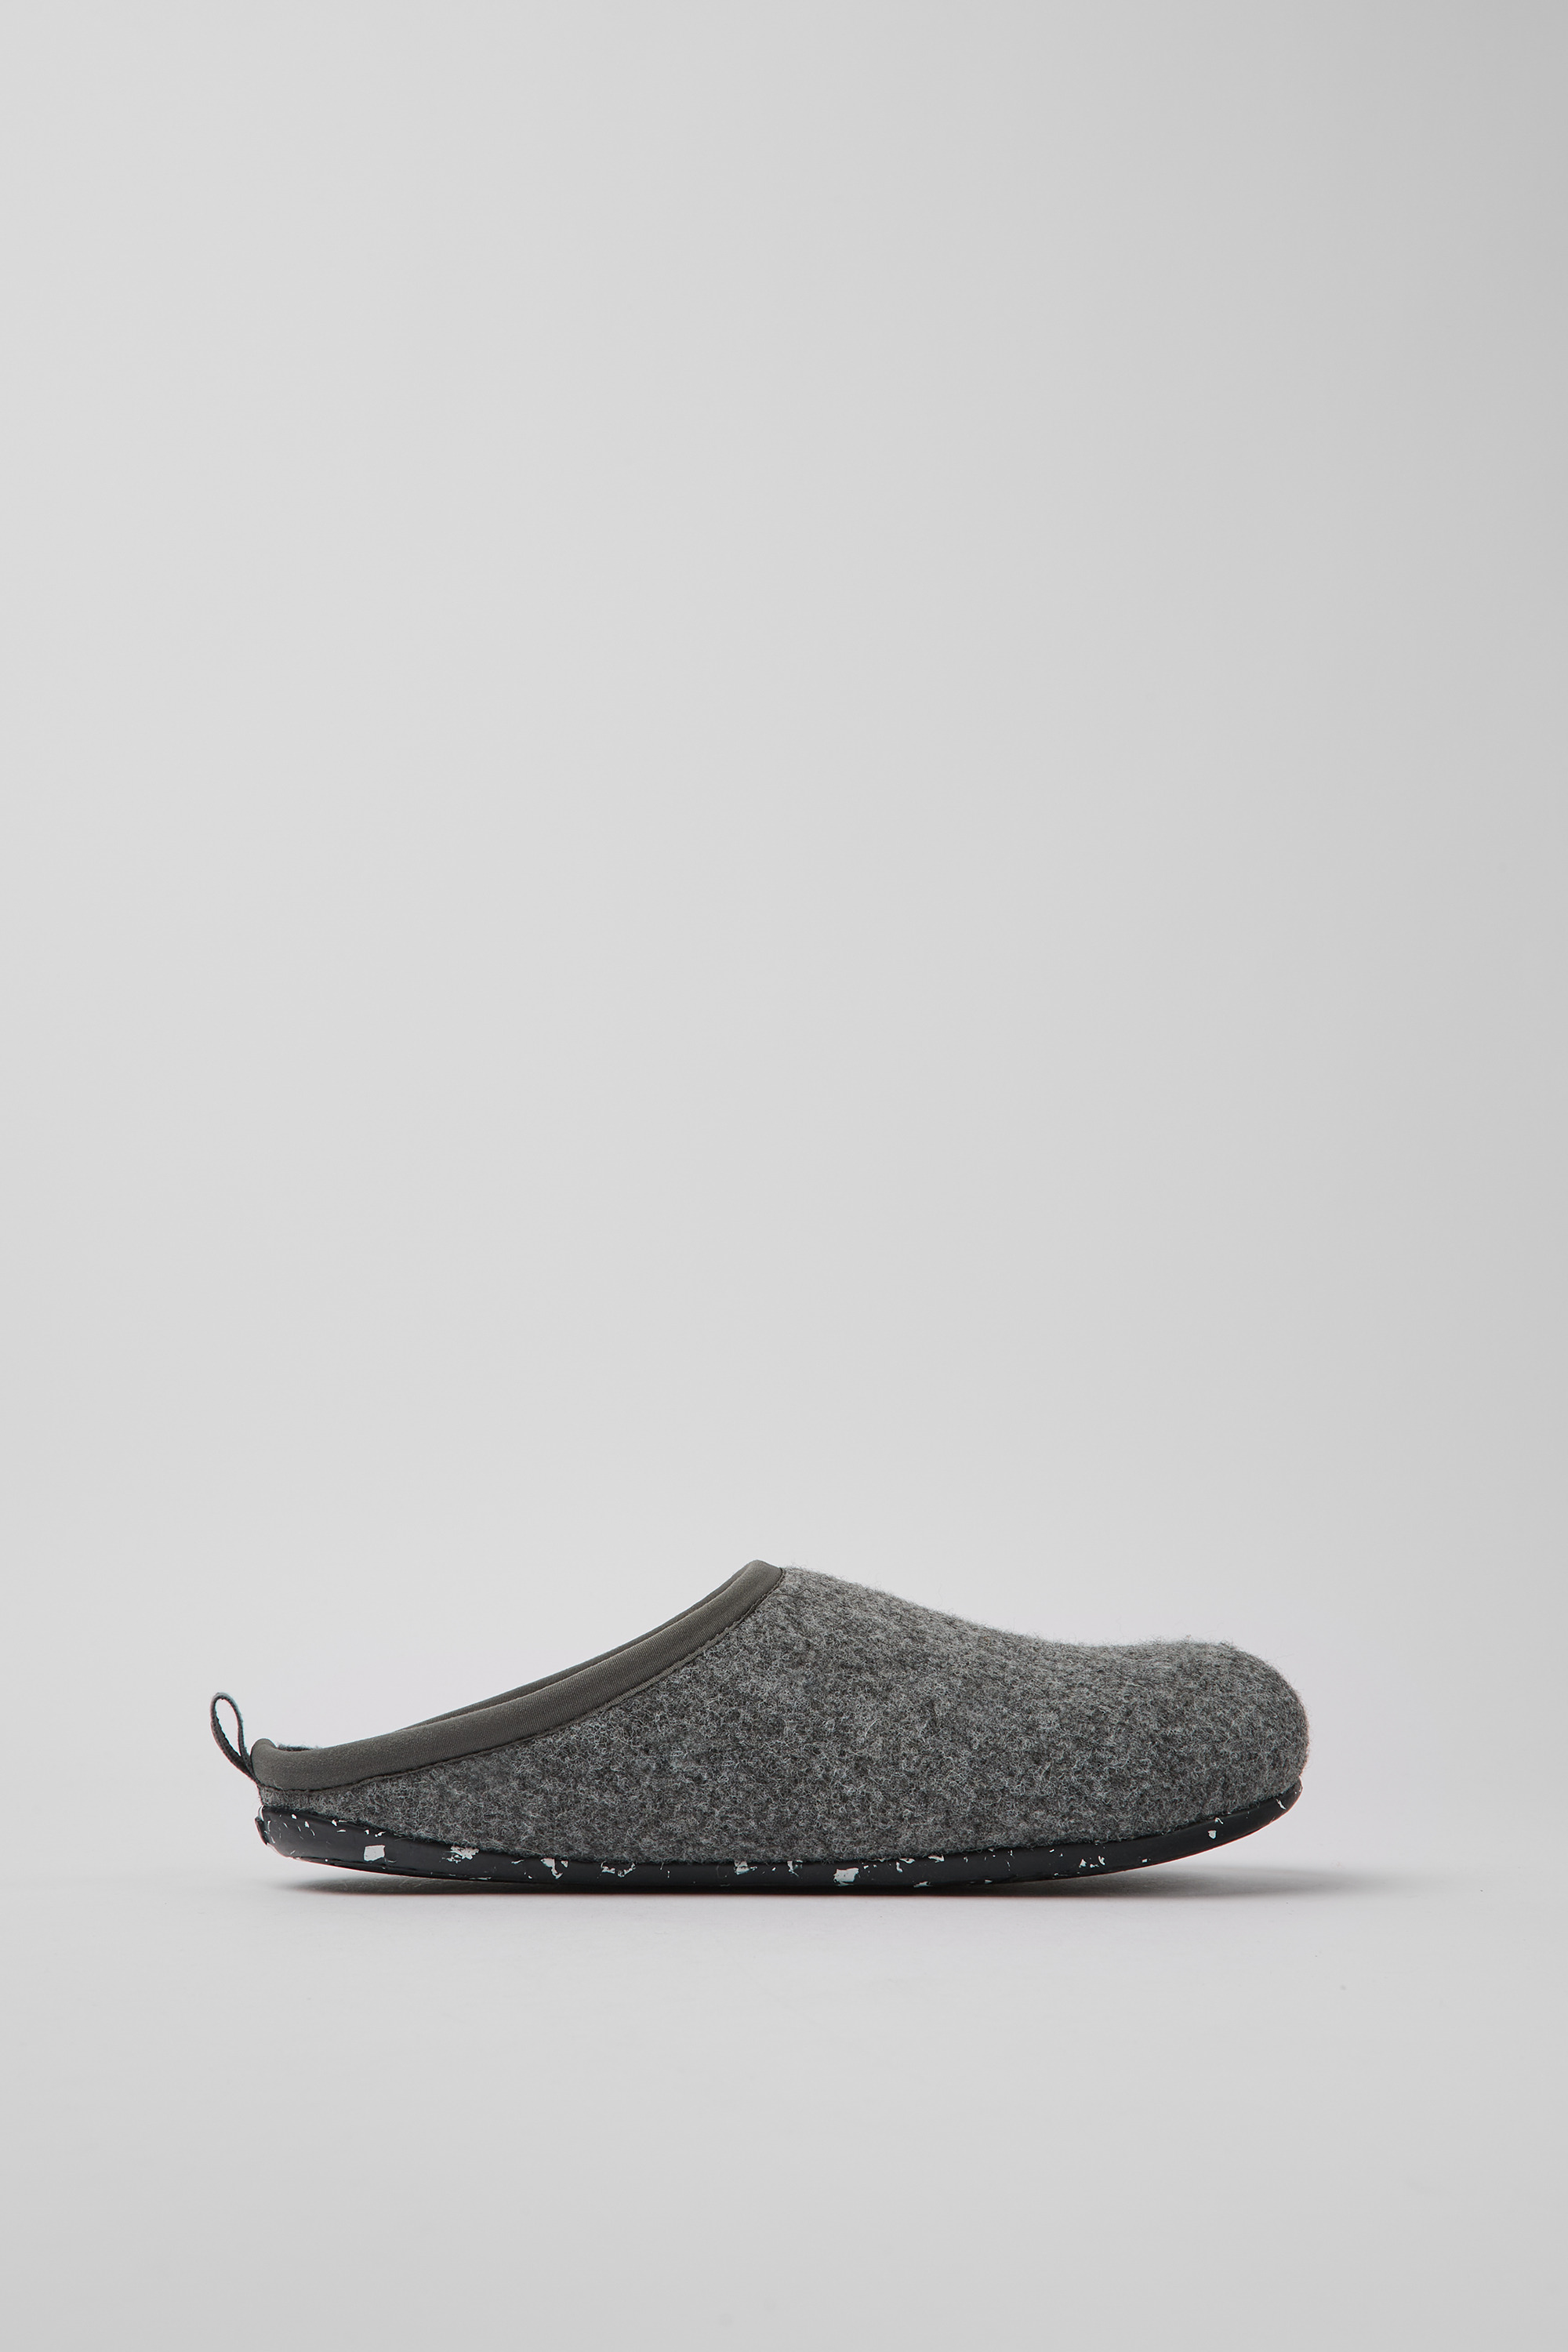 Wabi Grey Slippers for Women - collection - Camper